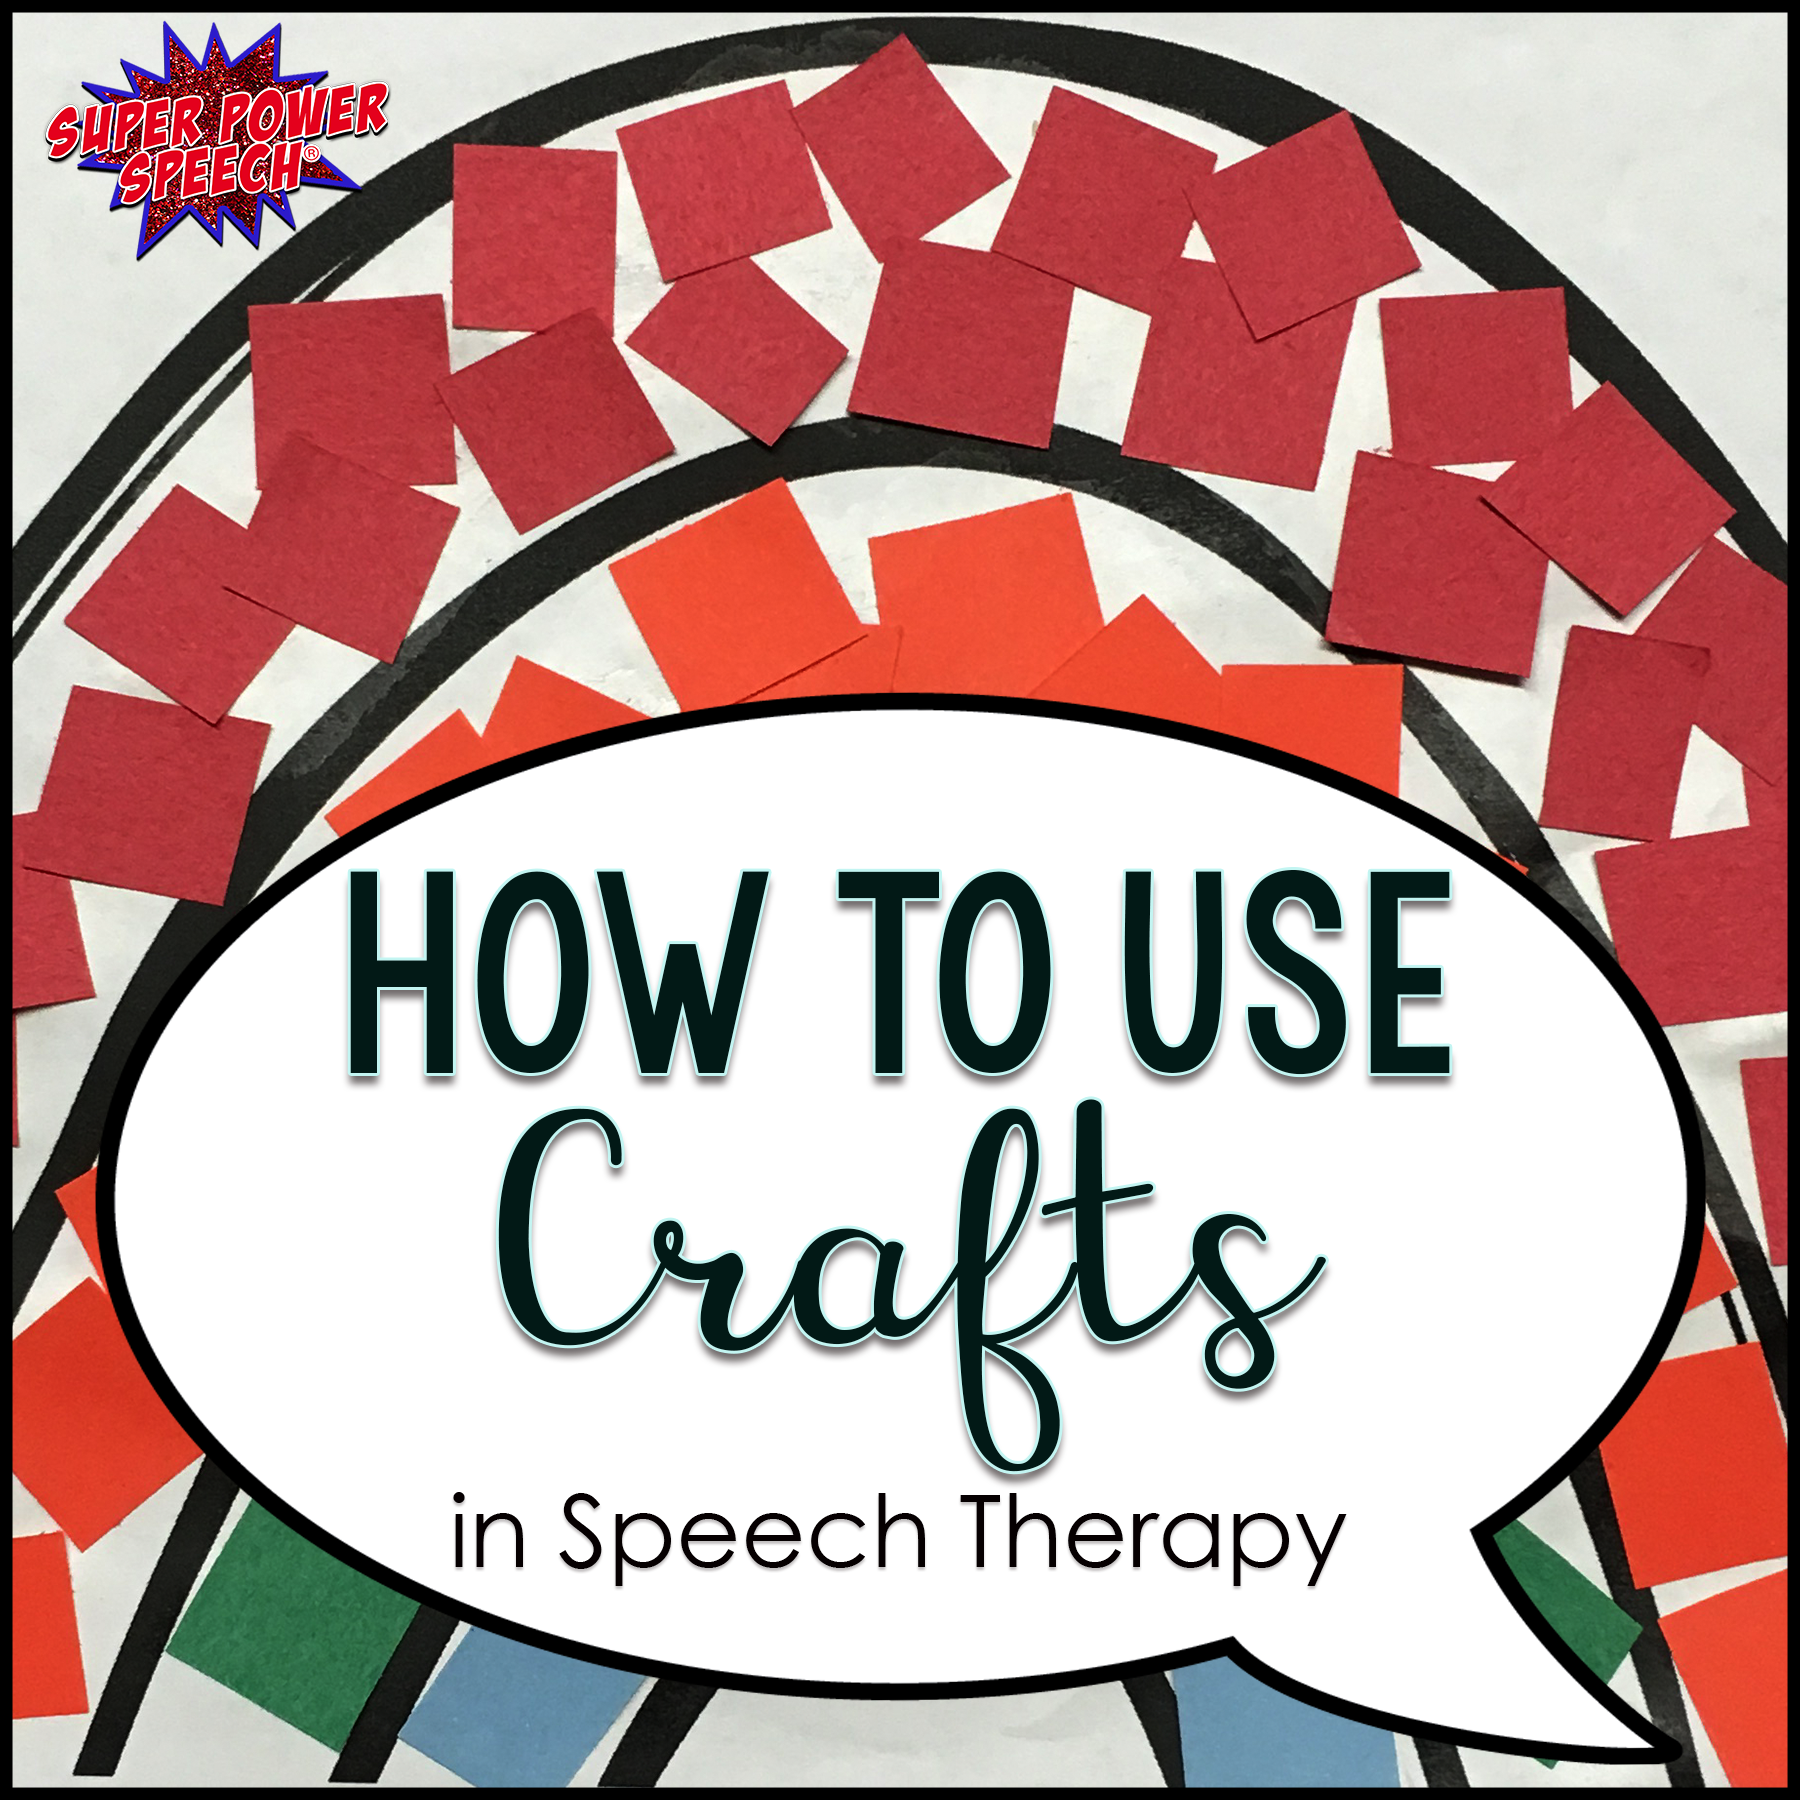 How to use crafts in speech therapy